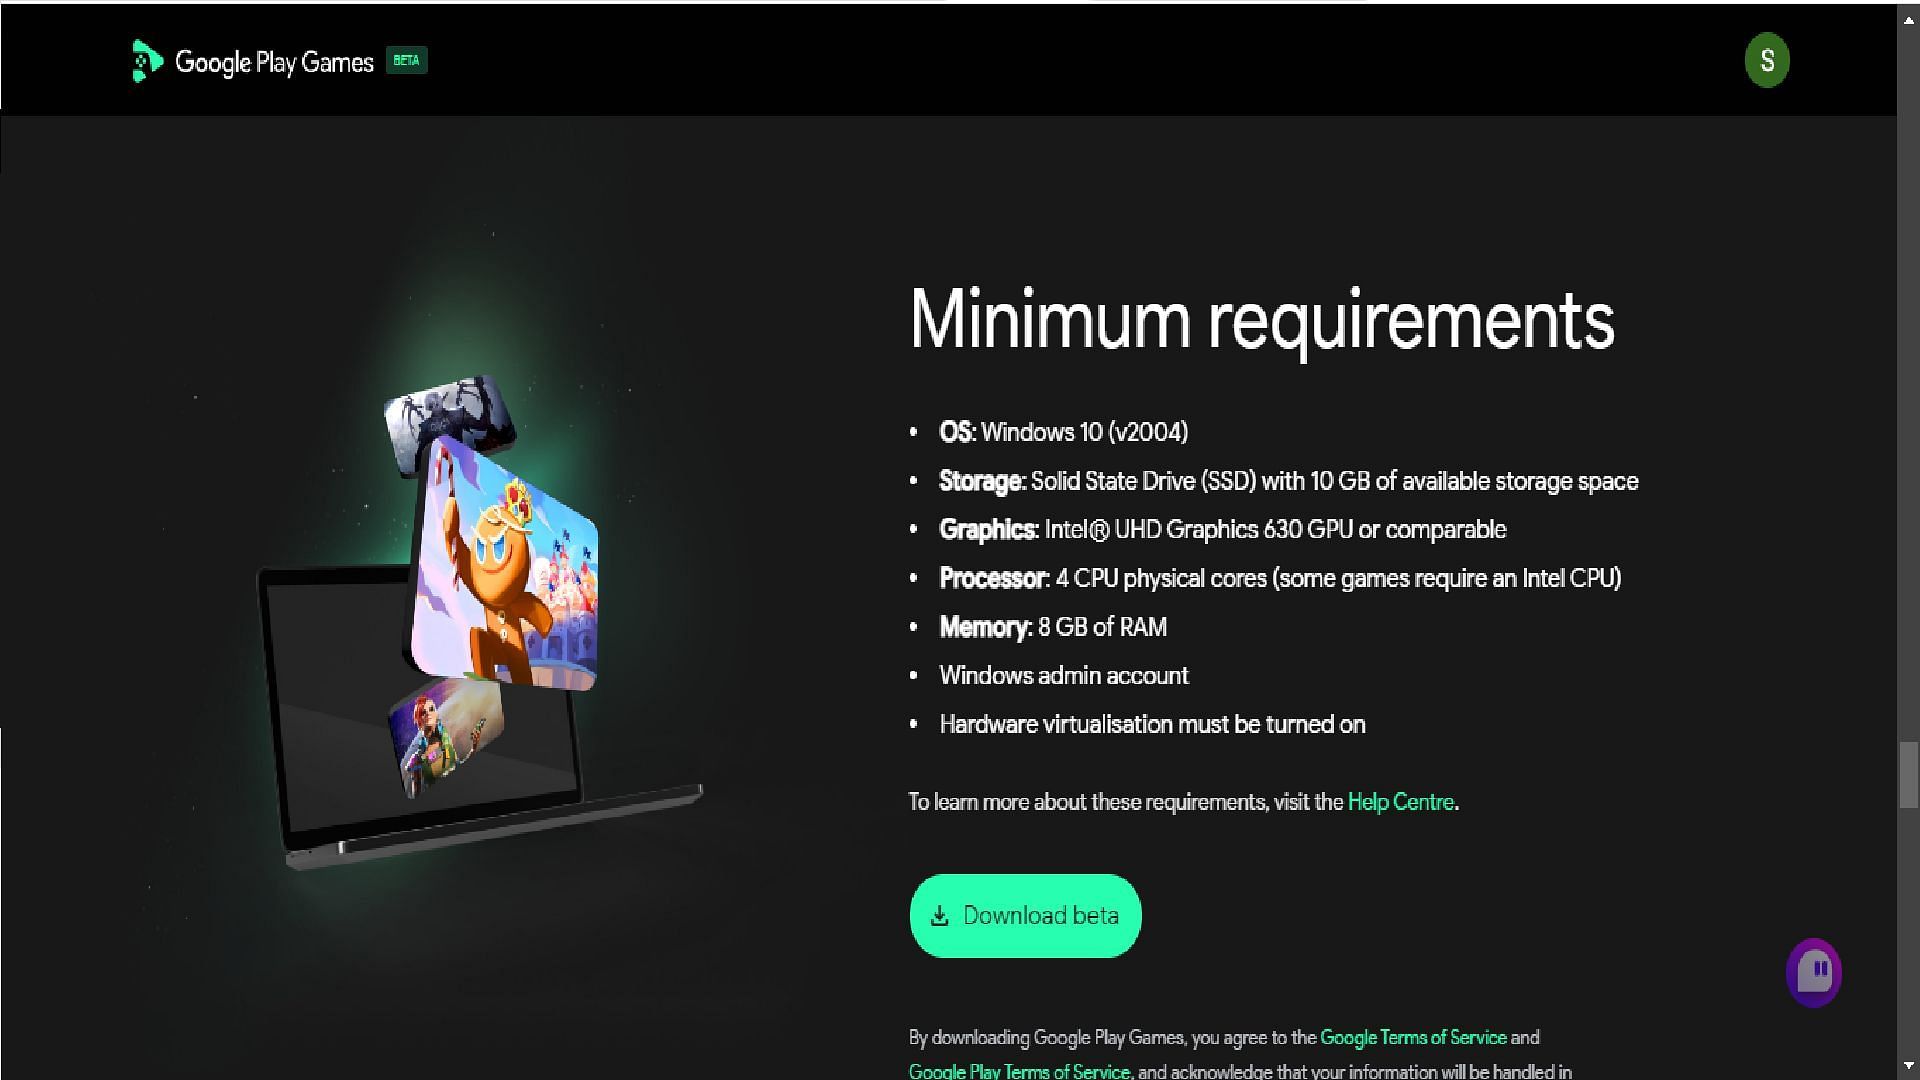 Here are the minimum requirements to download Google Play Games on PC (Image via Google)